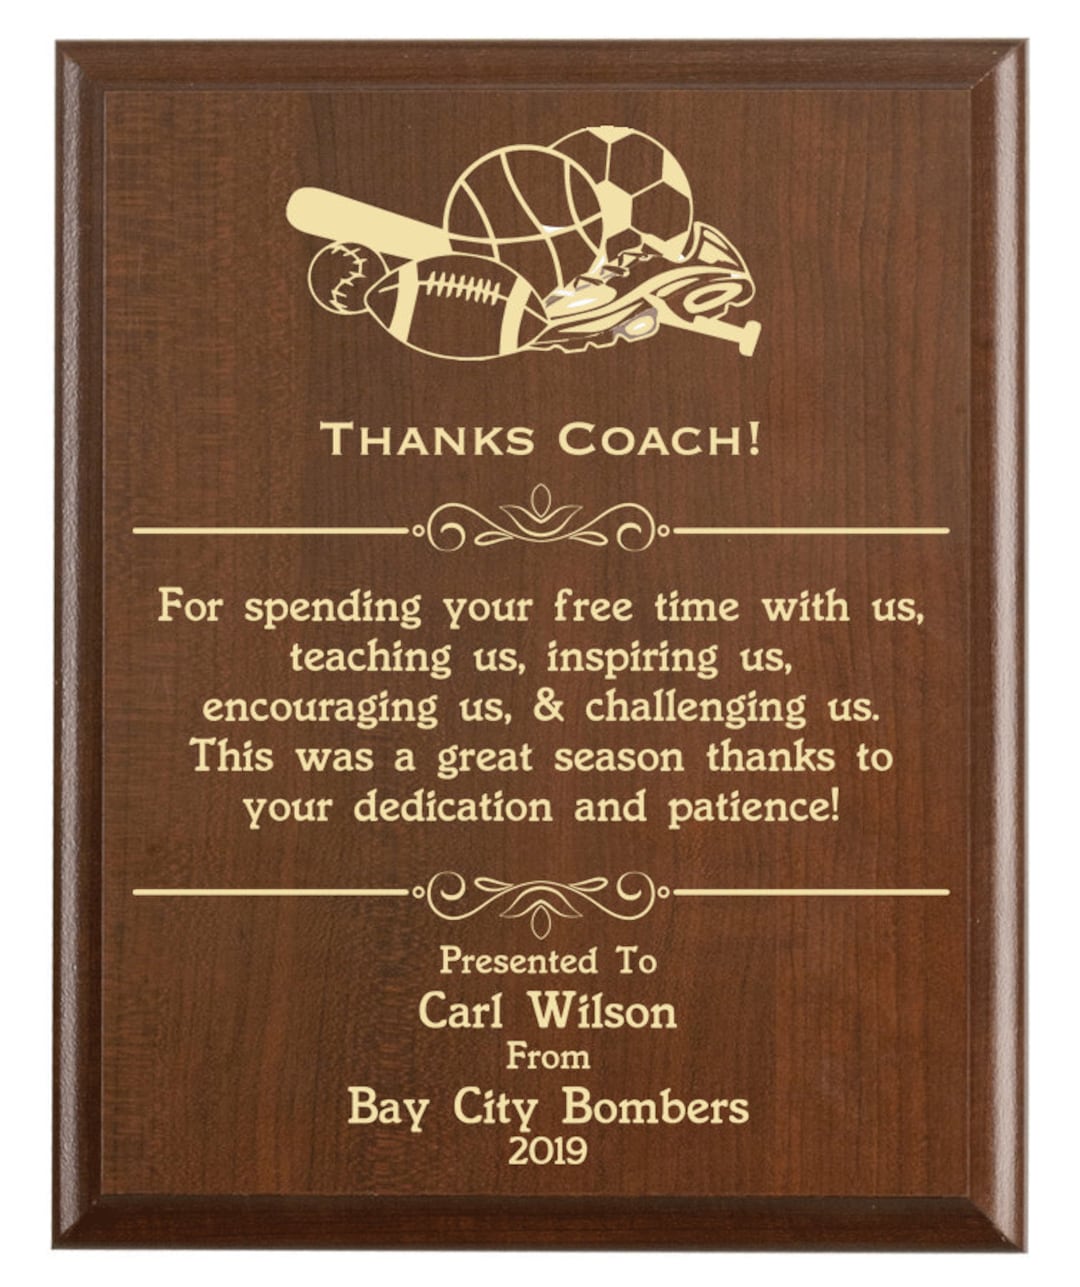 Coach Thank You Gift End of Season Award Plaque From image photo picture